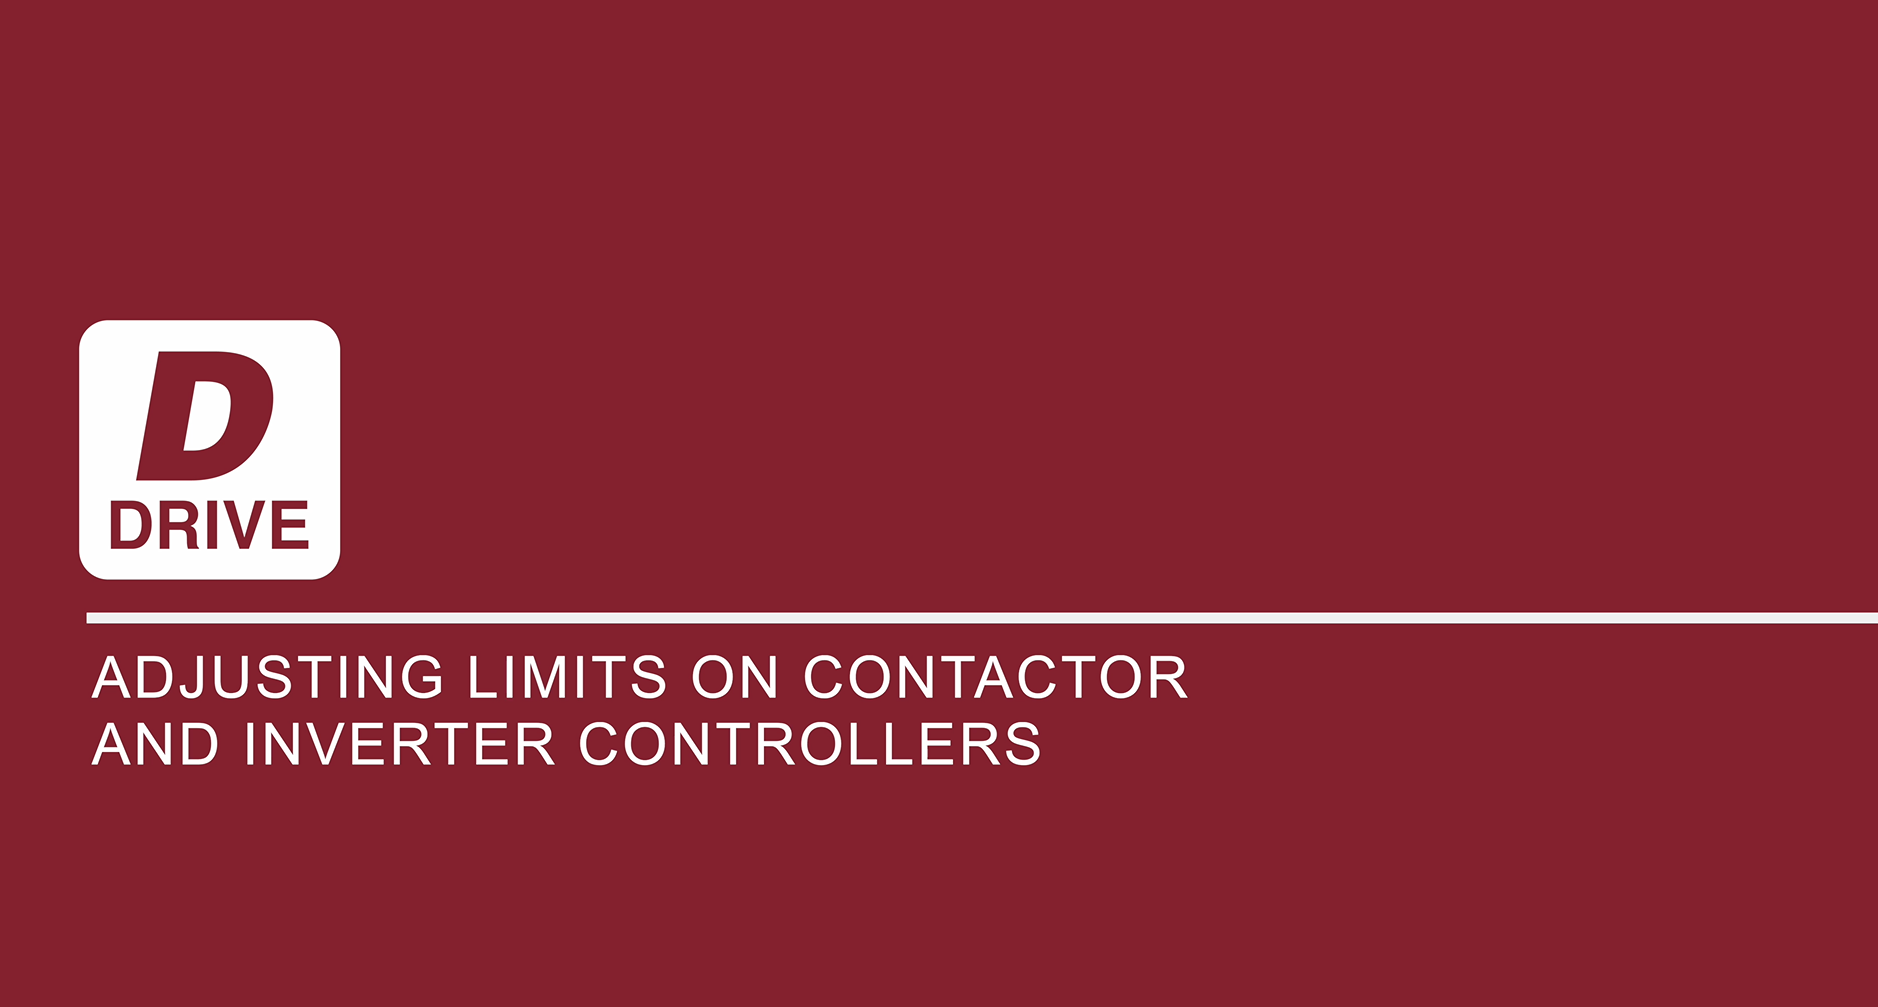 Adjusting limits on contactor and inverter controllers